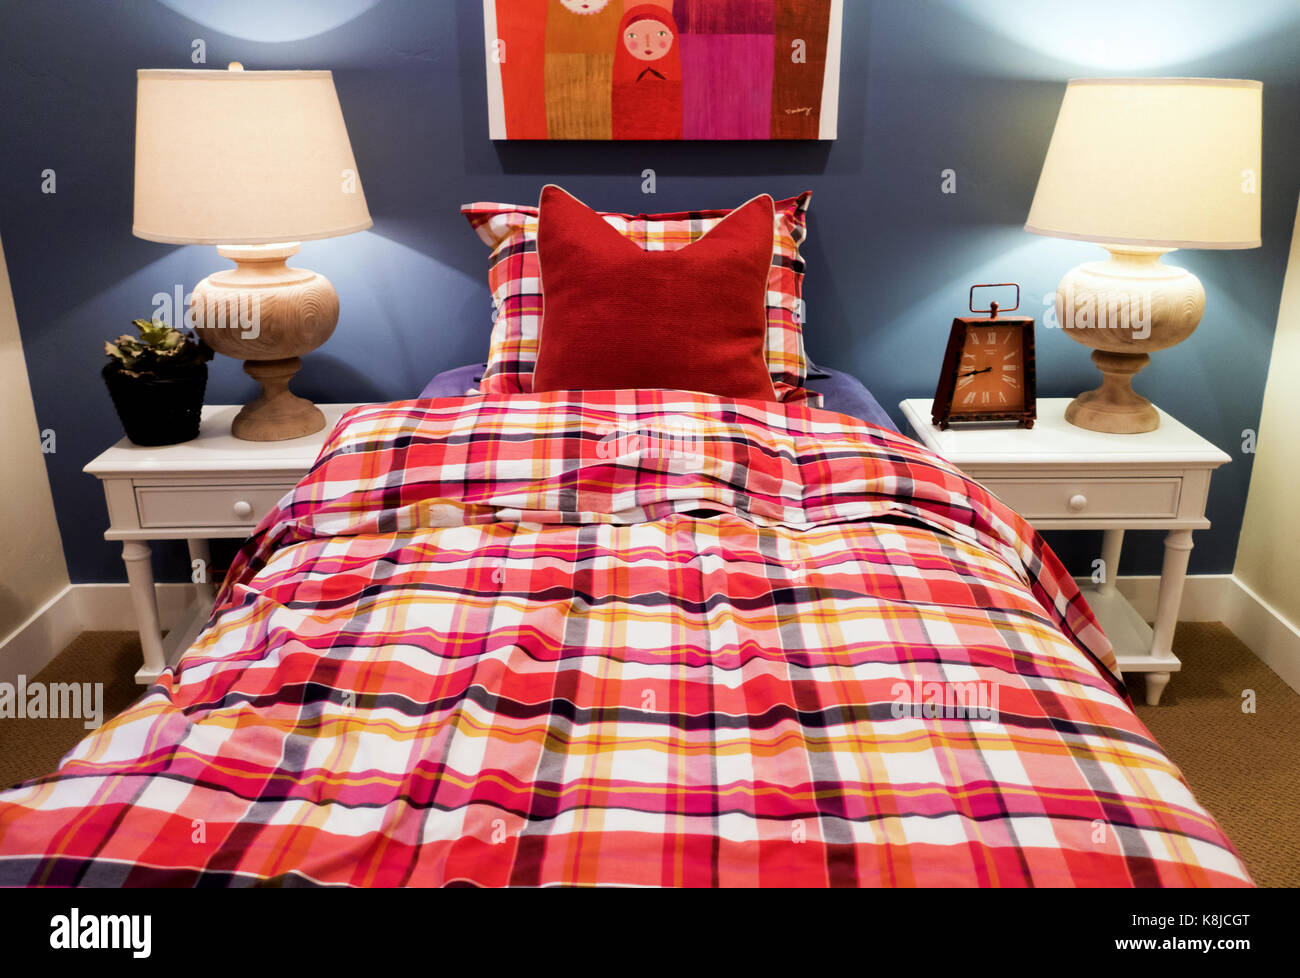 https://c8.alamy.com/comp/K8JCGT/a-warm-bedroom-with-a-double-bed-and-checkered-comforter-two-nightstands-K8JCGT.jpg